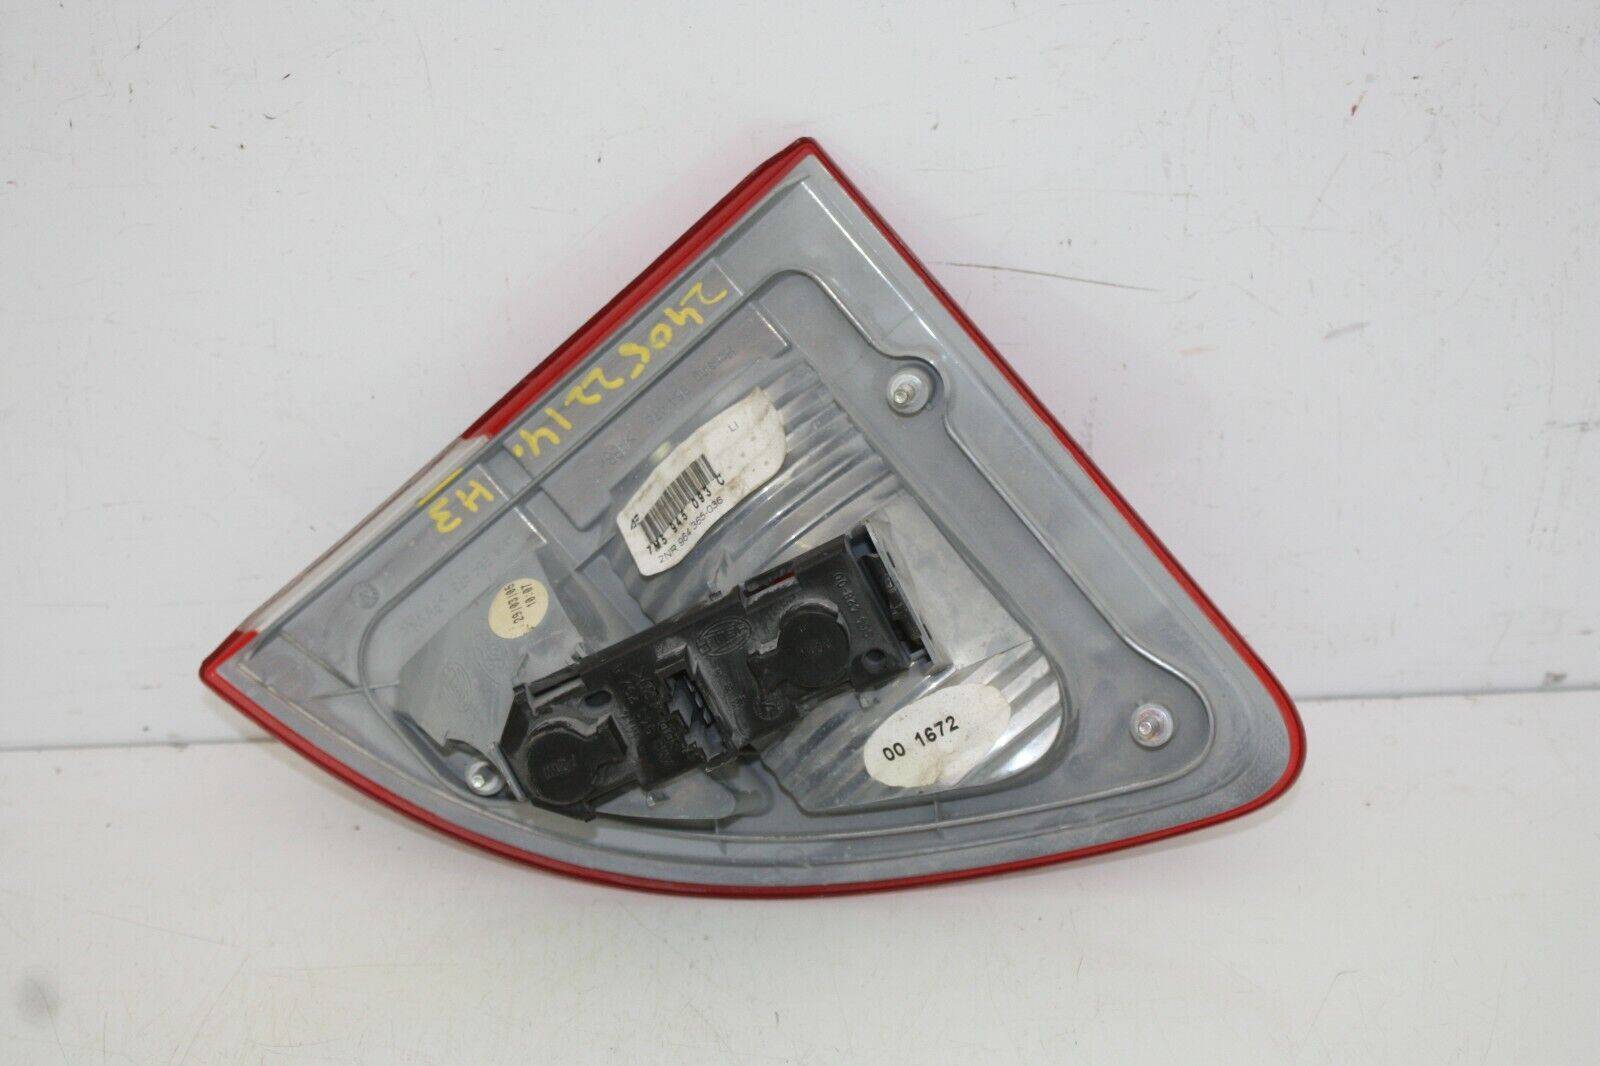 Ford-Galaxy-Left-Side-Boot-Light-2001-to-2006-7M5945093C-Genuine-175367530525-4